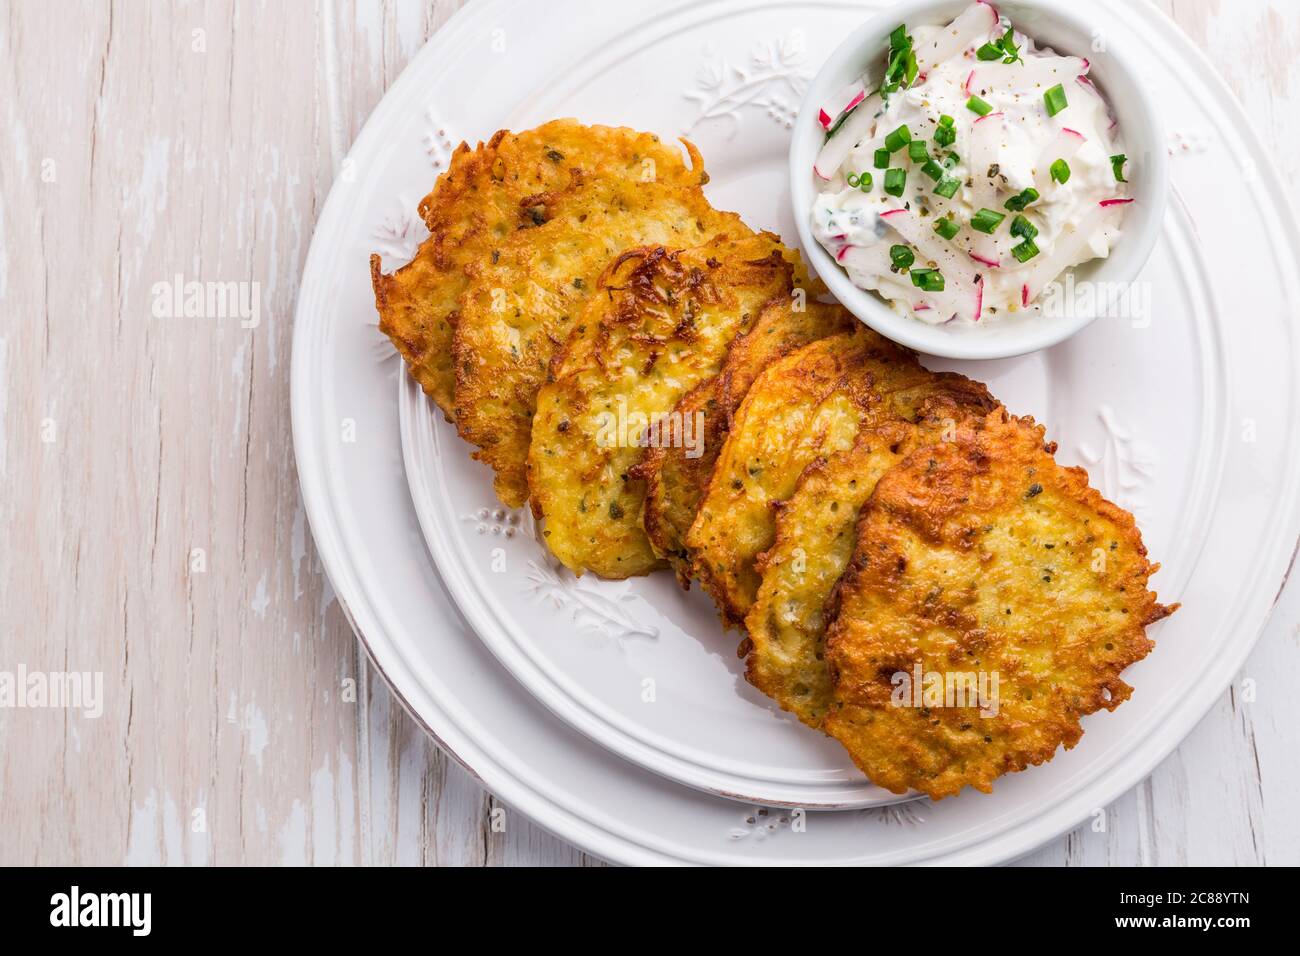 Fried potato  pancake with radishes cream cheese and chives. Vegetarian food concept, Stock Photo